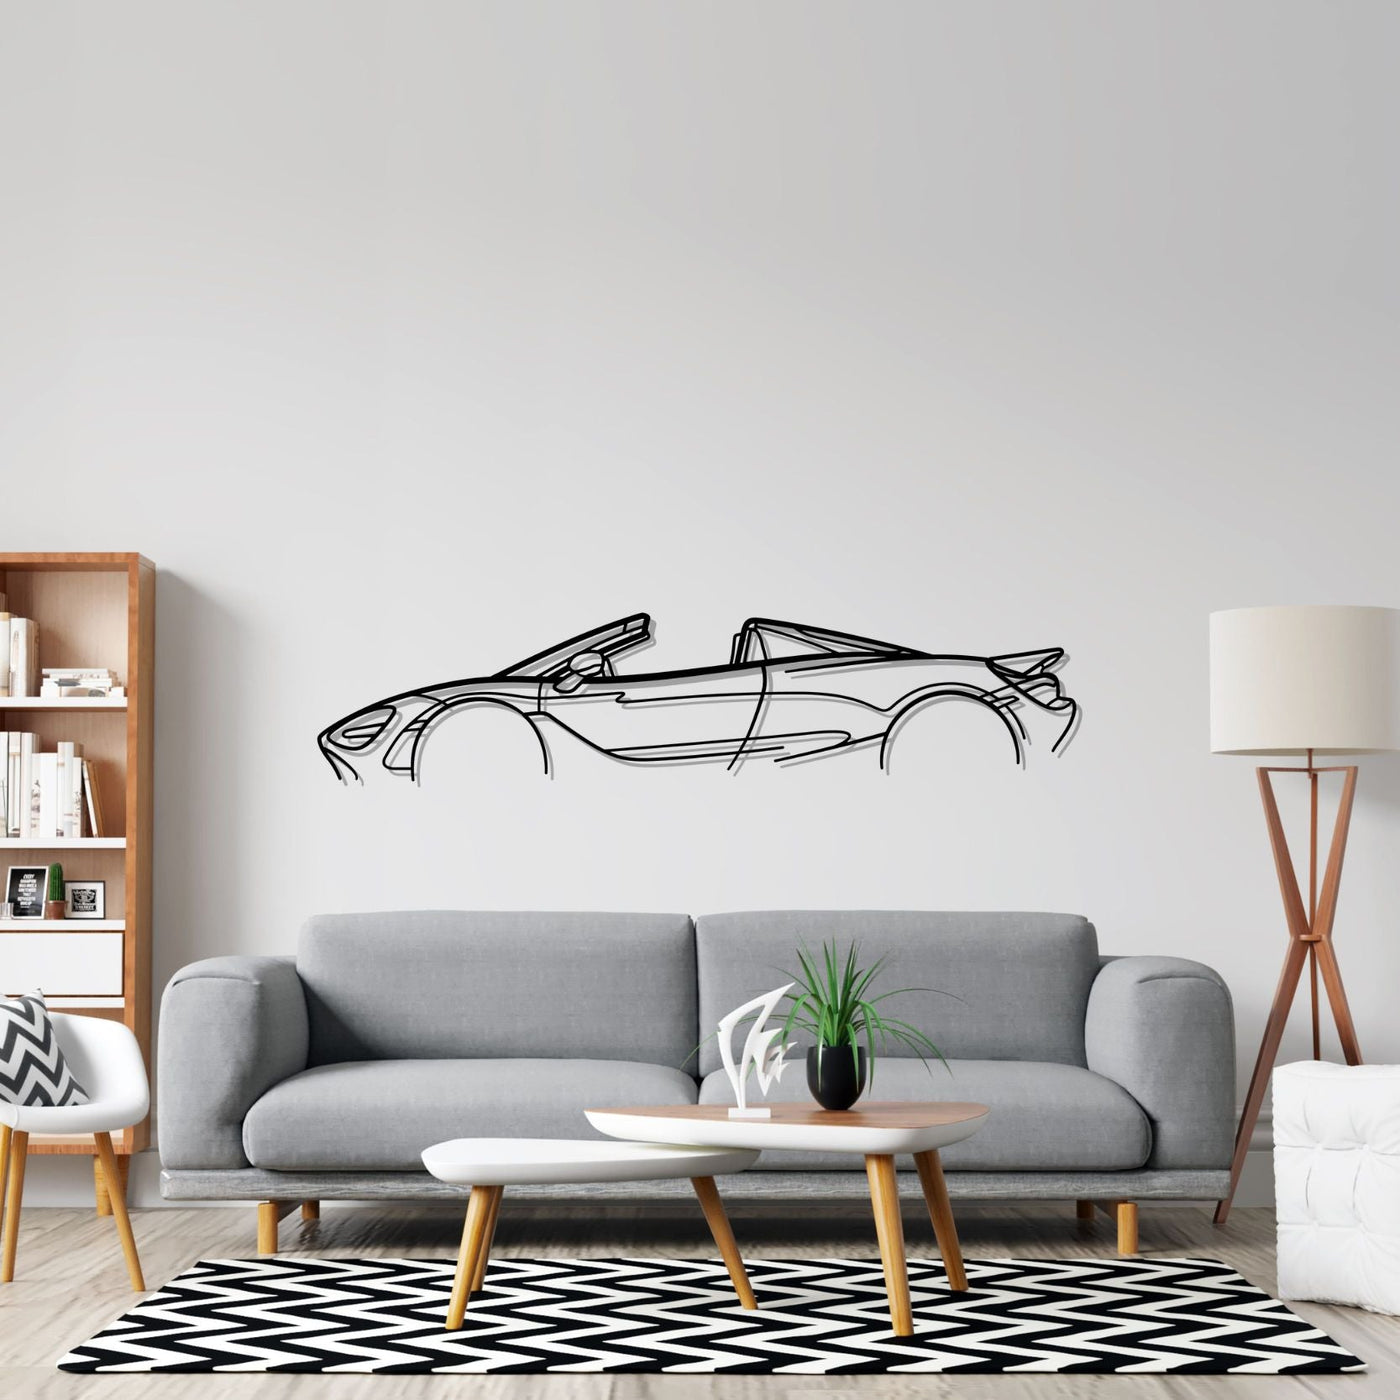 720S Spider 2022 Classic Silhouette Metal Wall Art